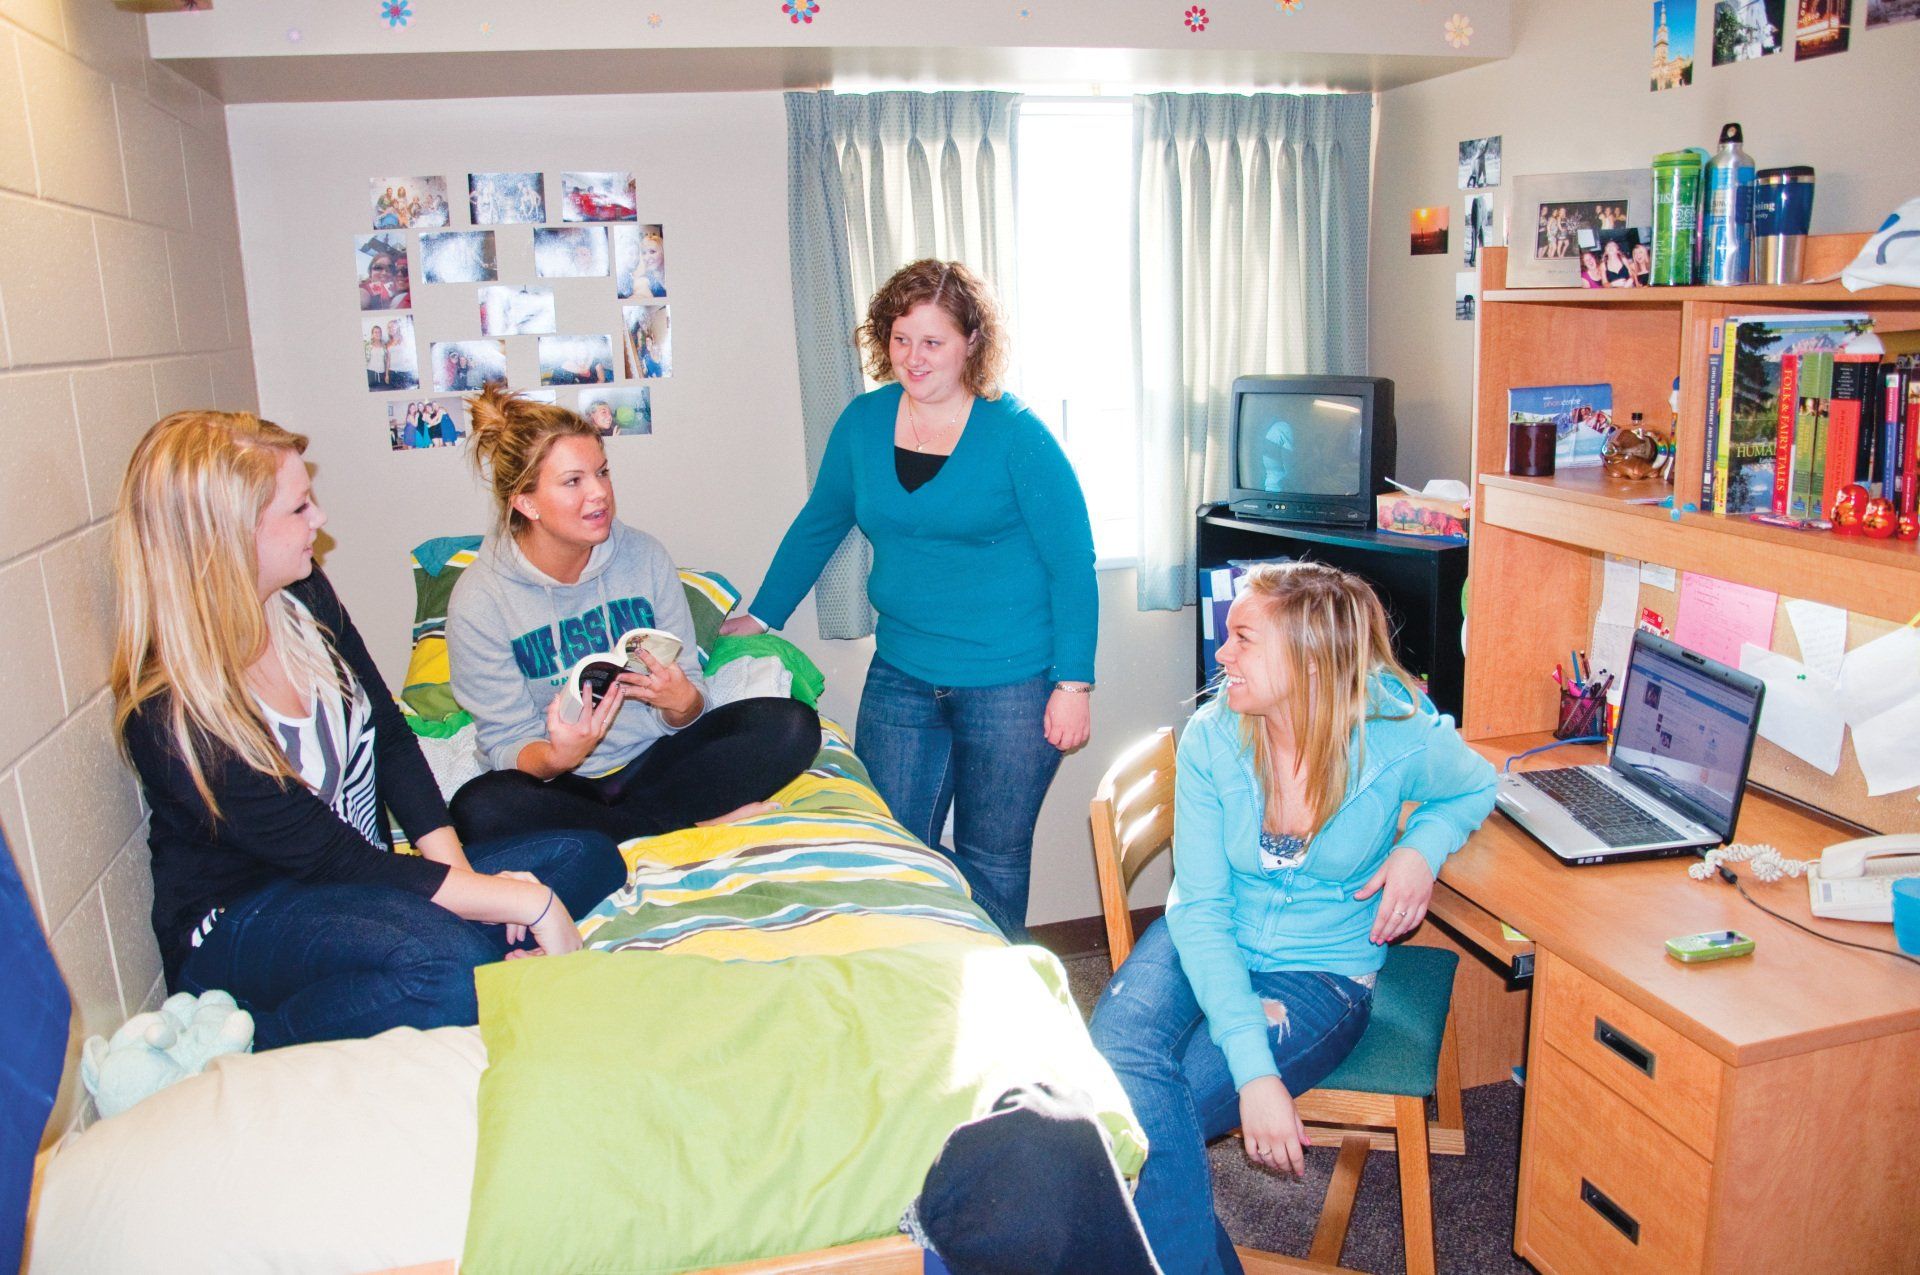 Students hanging out in a residence room